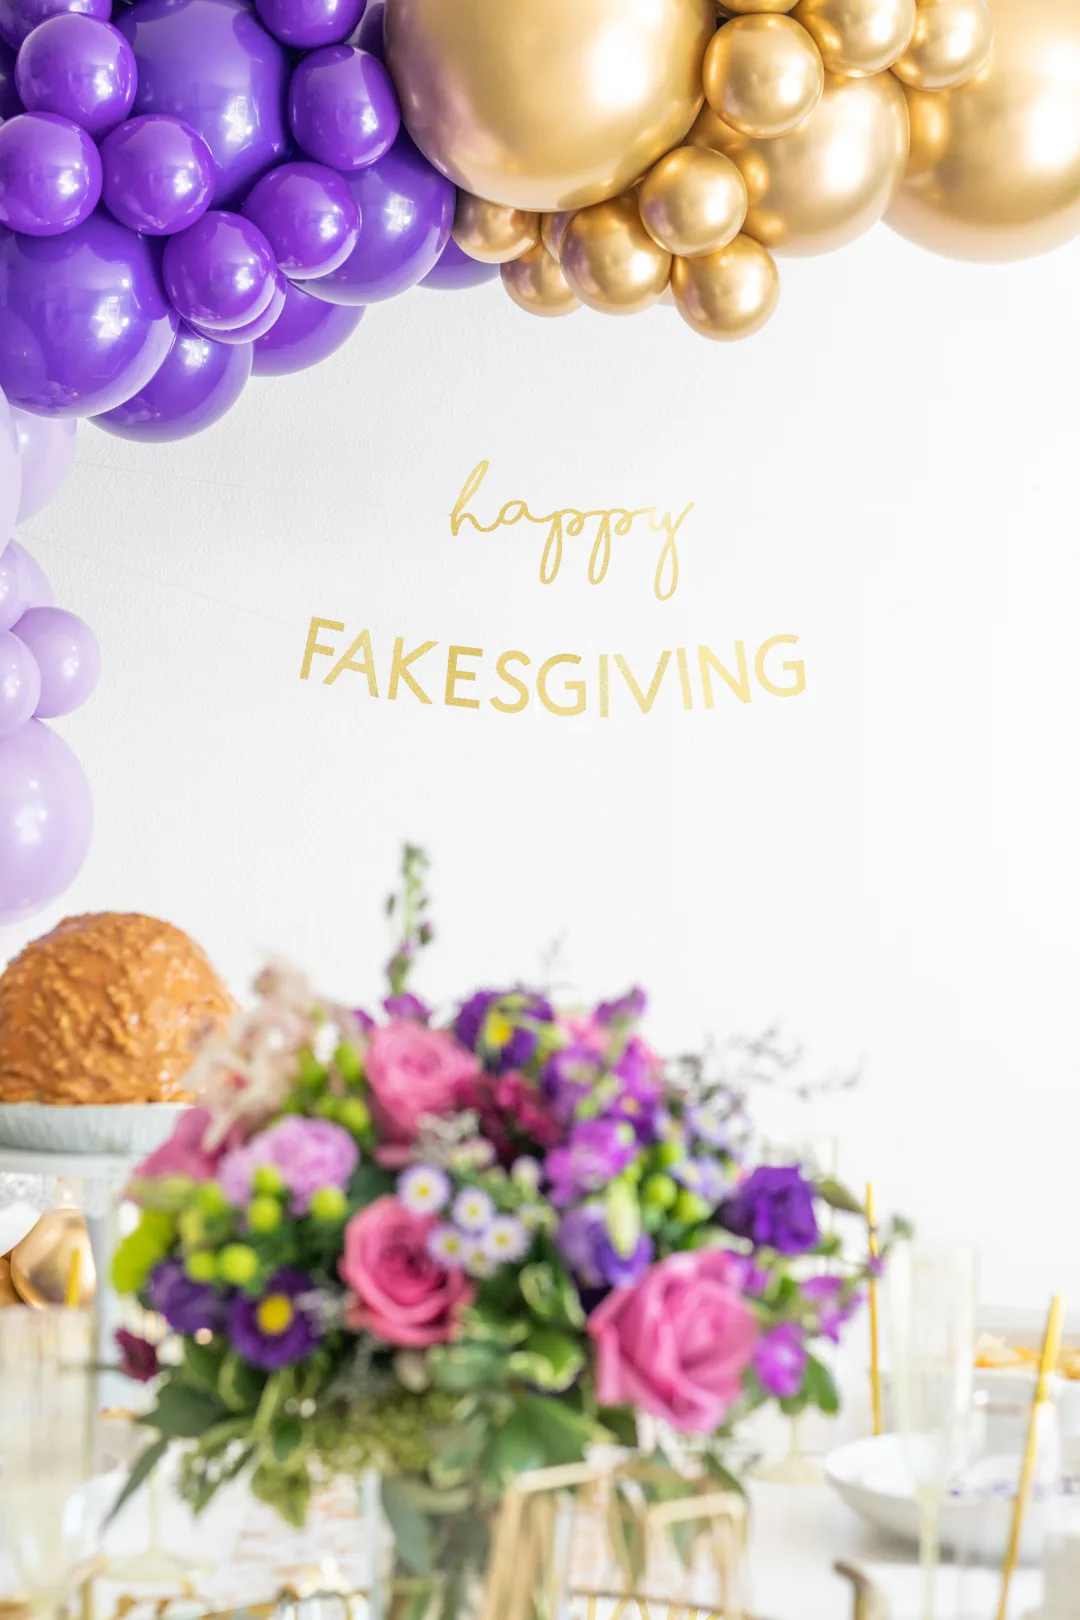 happy fakesgiving gold banner in focus as part of a fakesgiving party set up